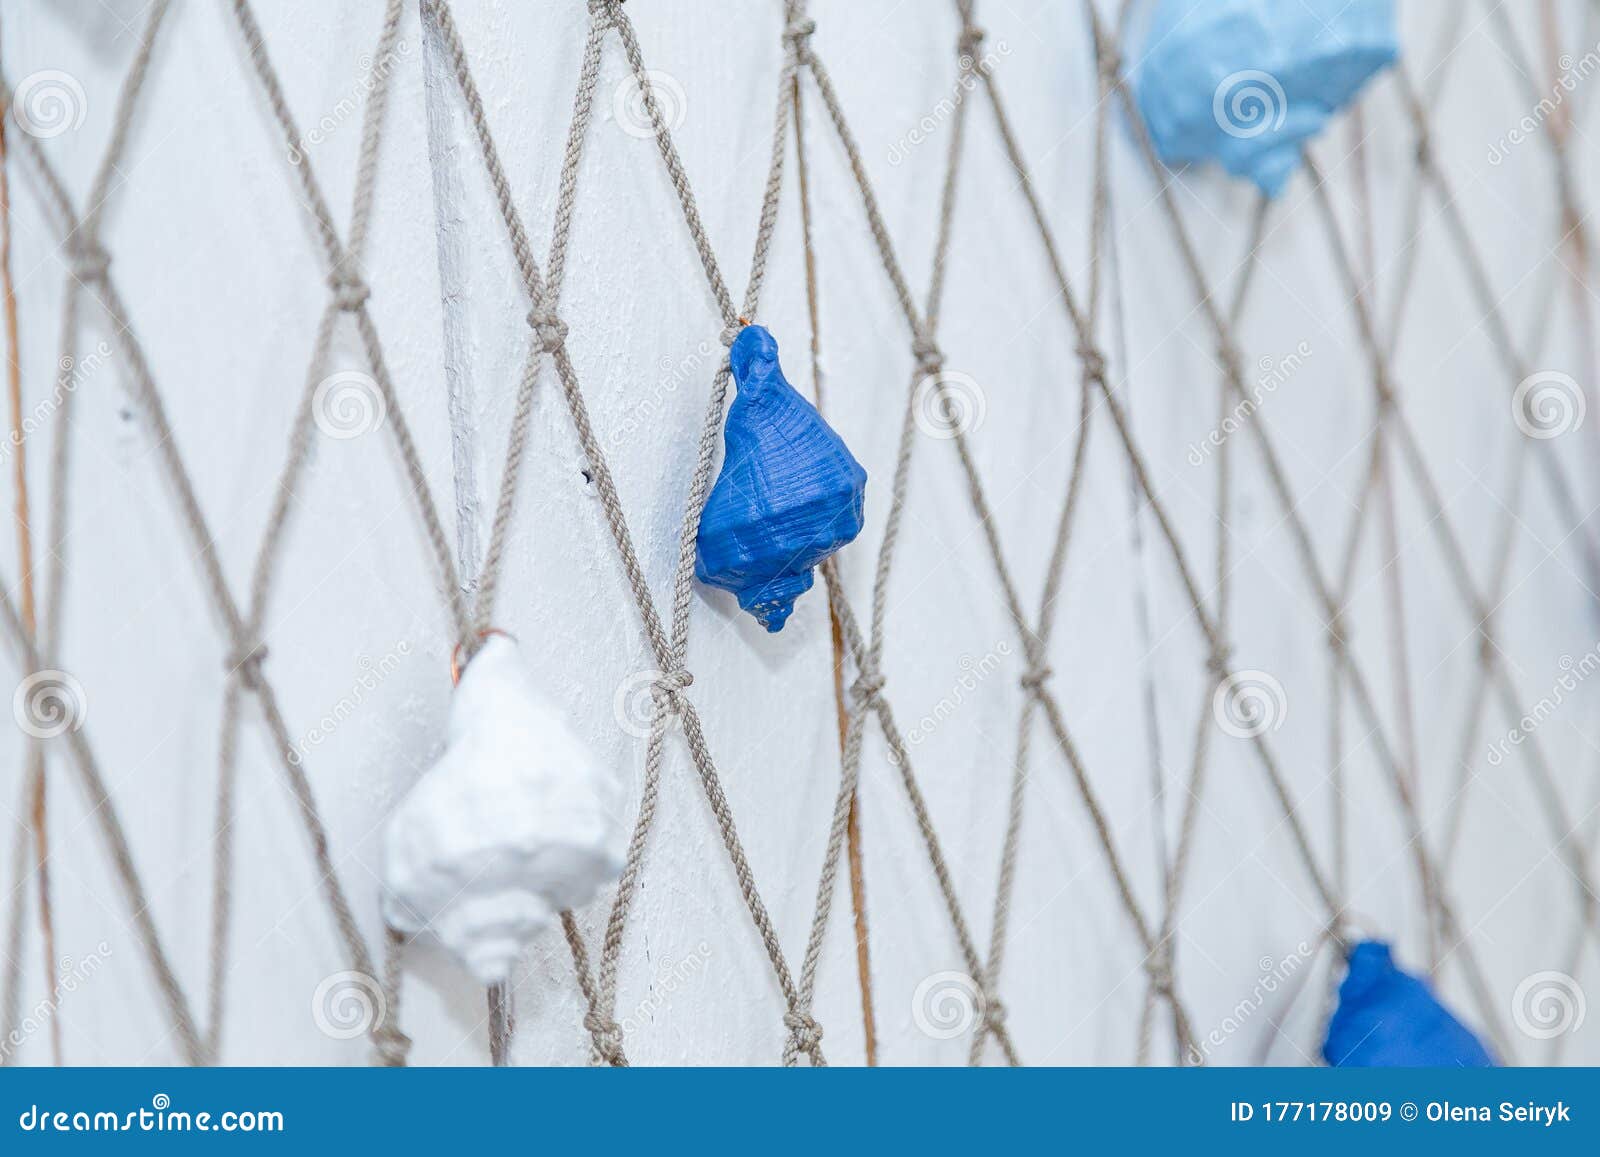 Thematic Sea Party Decorations, Blue and White Painted Sea Shells Hanging  on Fish Net. Boy Birthday Party Stock Image - Image of painted, conceptual:  177178009